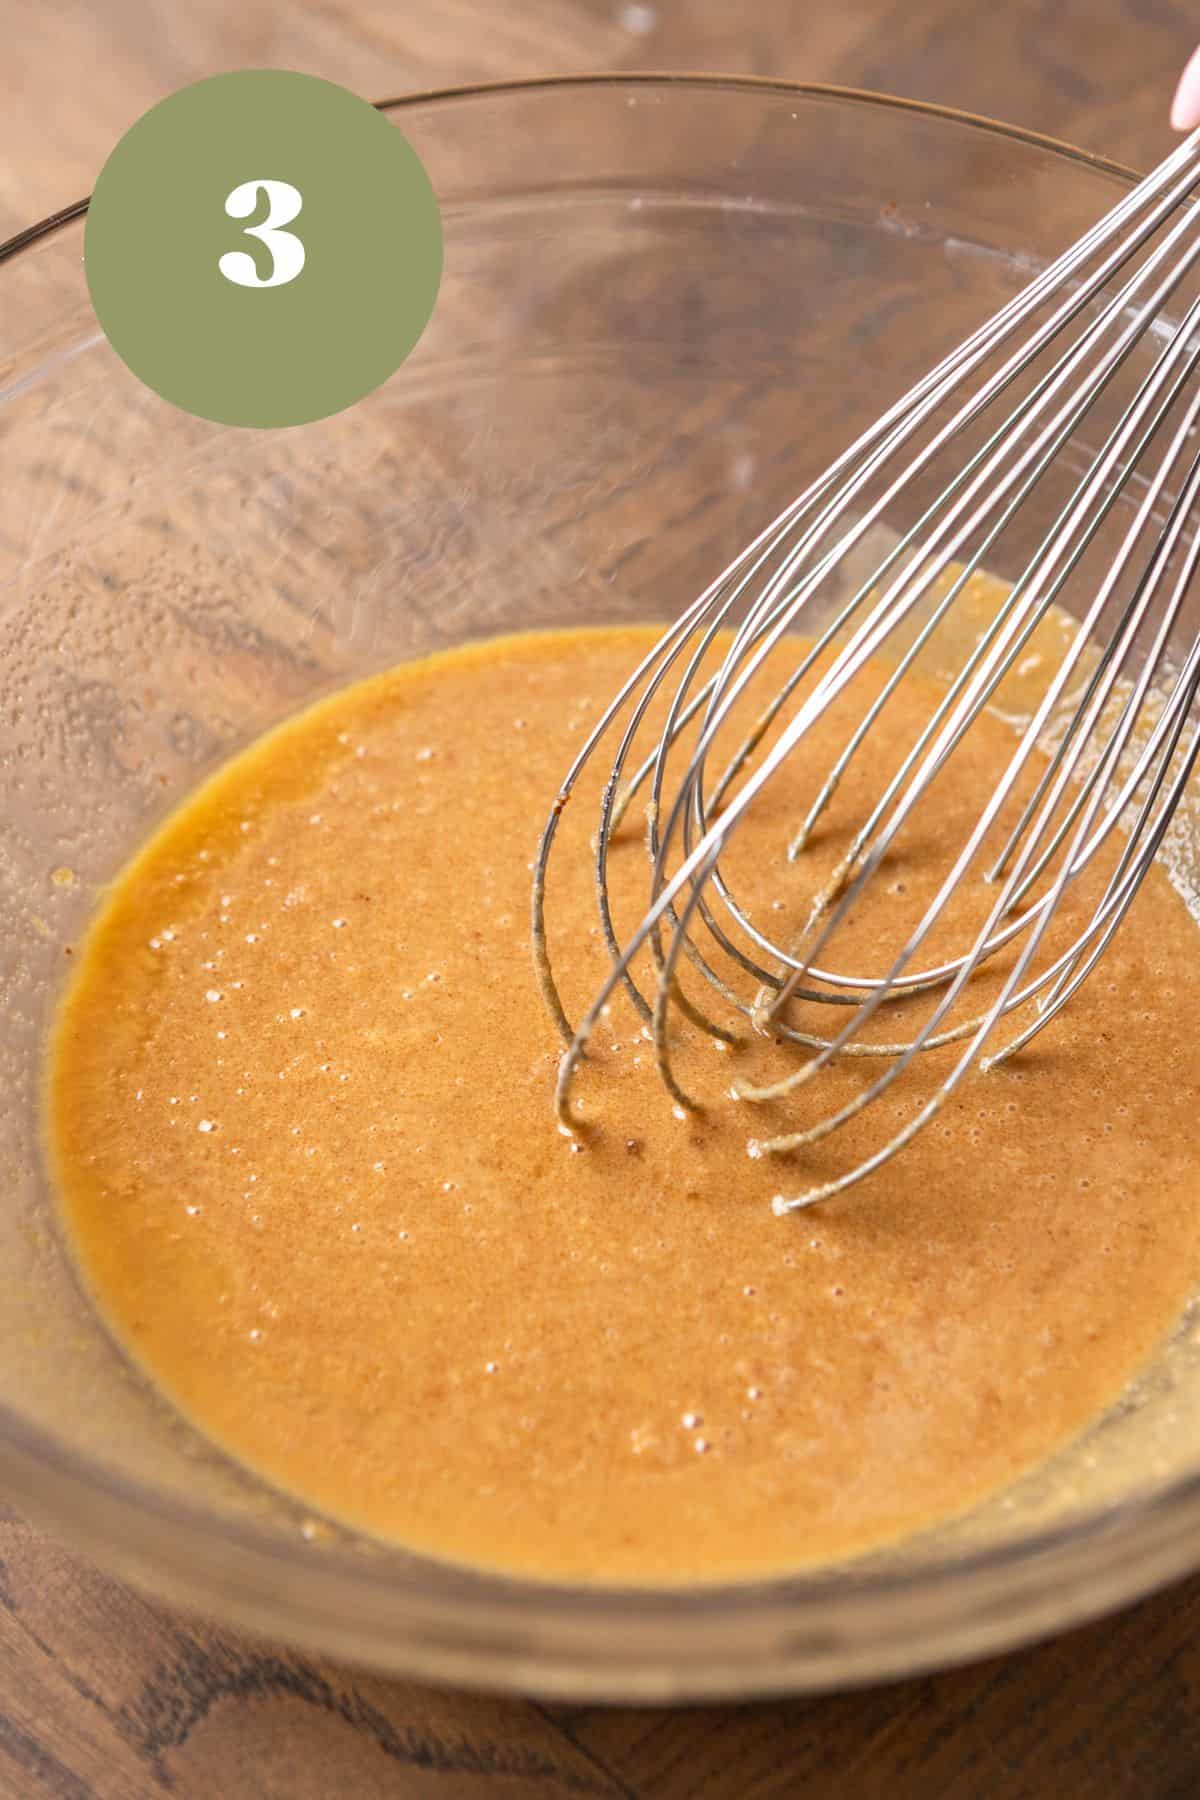 Melted butter, sugar, and peanut butter being whisked together in a glass bowl.